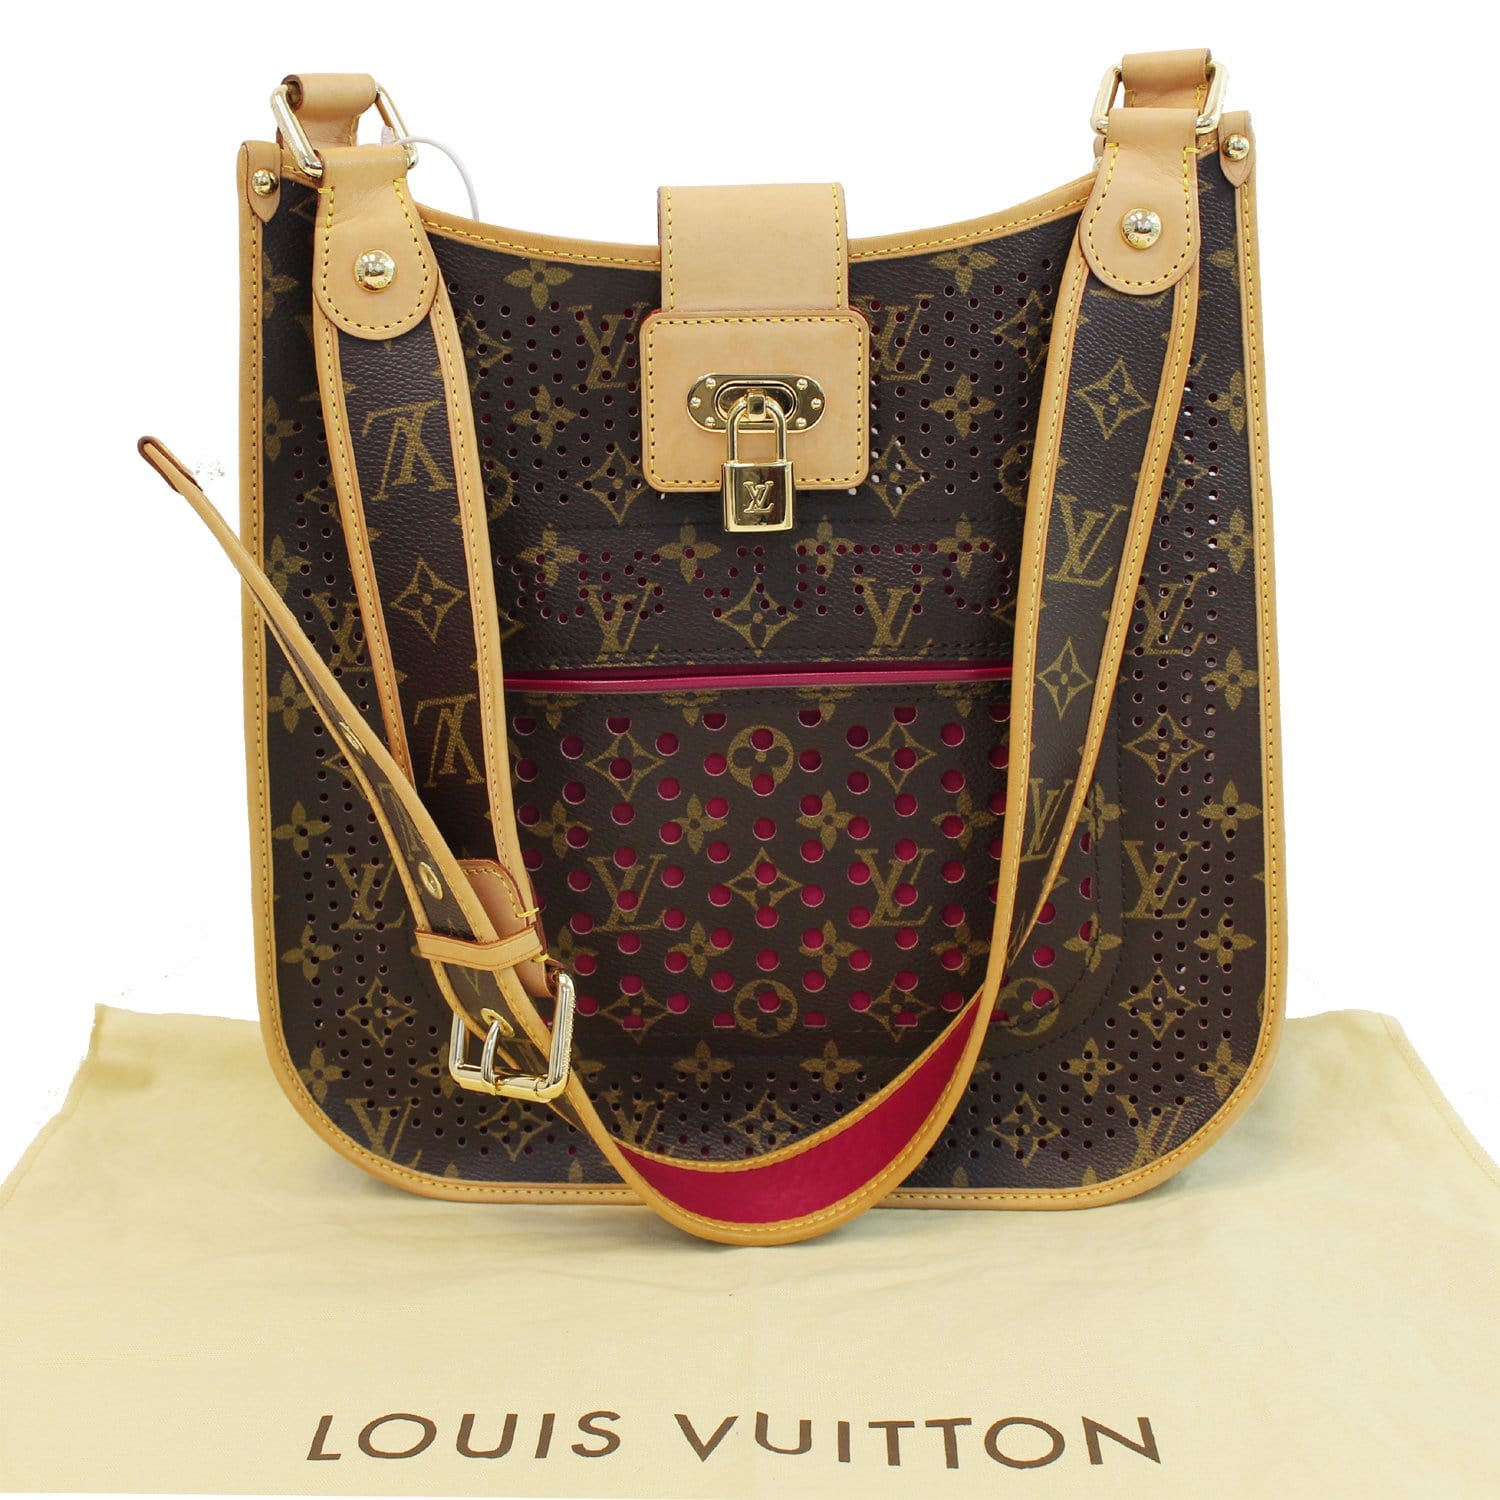 Louis Vuitton - Authenticated Musette Tango Handbag - Leather Pink for Women, Never Worn, with Tag